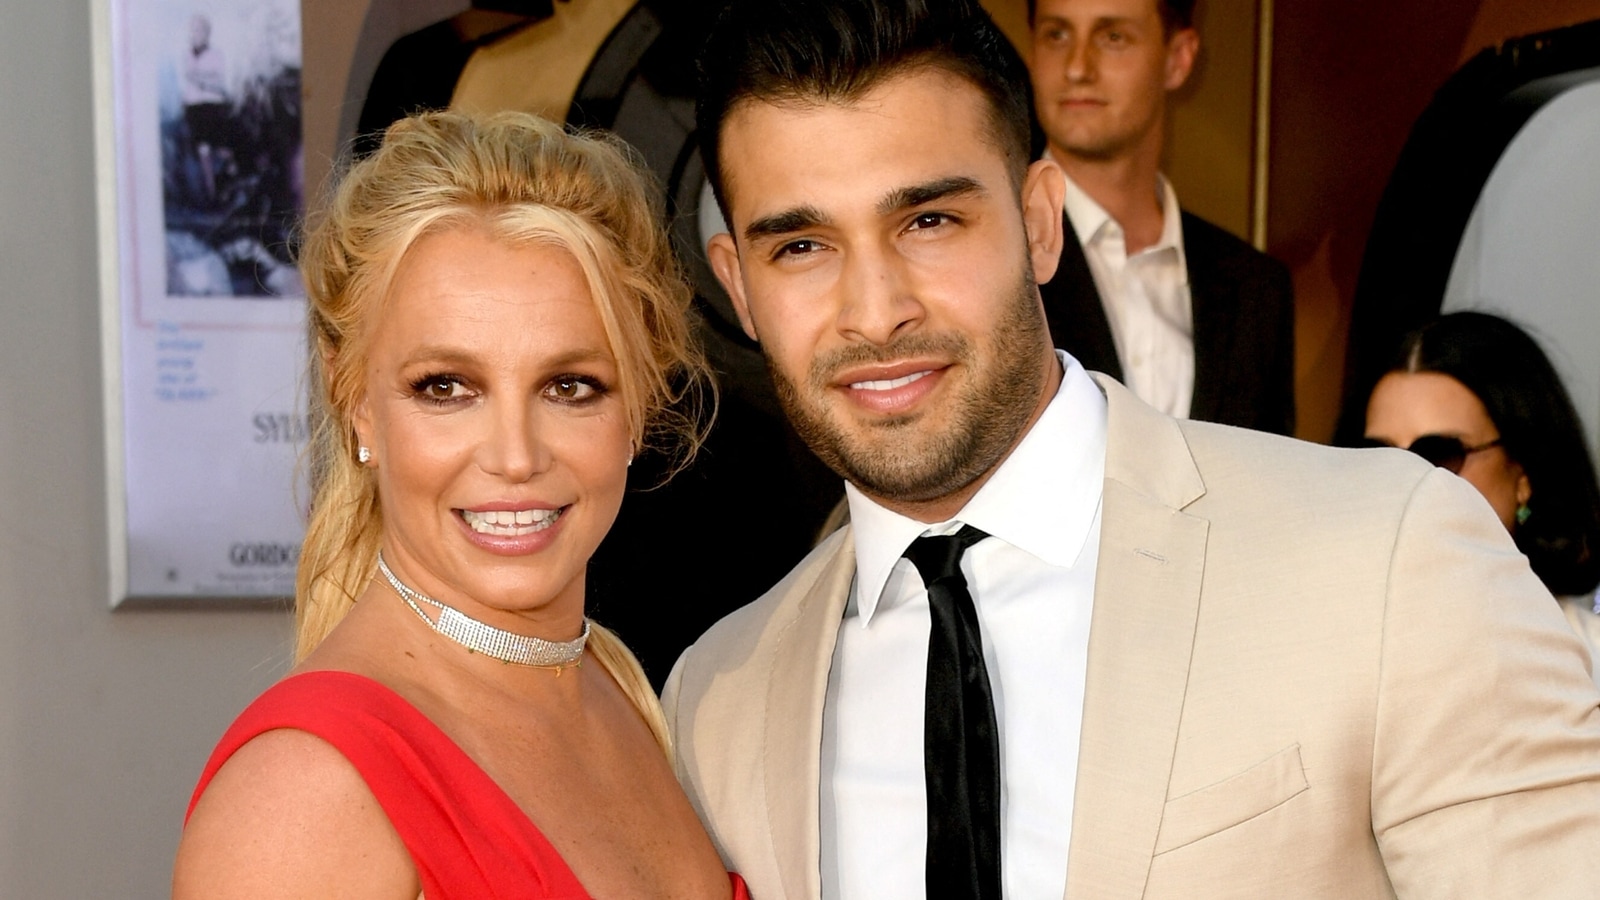 Britney Spears announces pregnancy, fiance Sam Asghari promises not to take fatherhood ‘lightly’